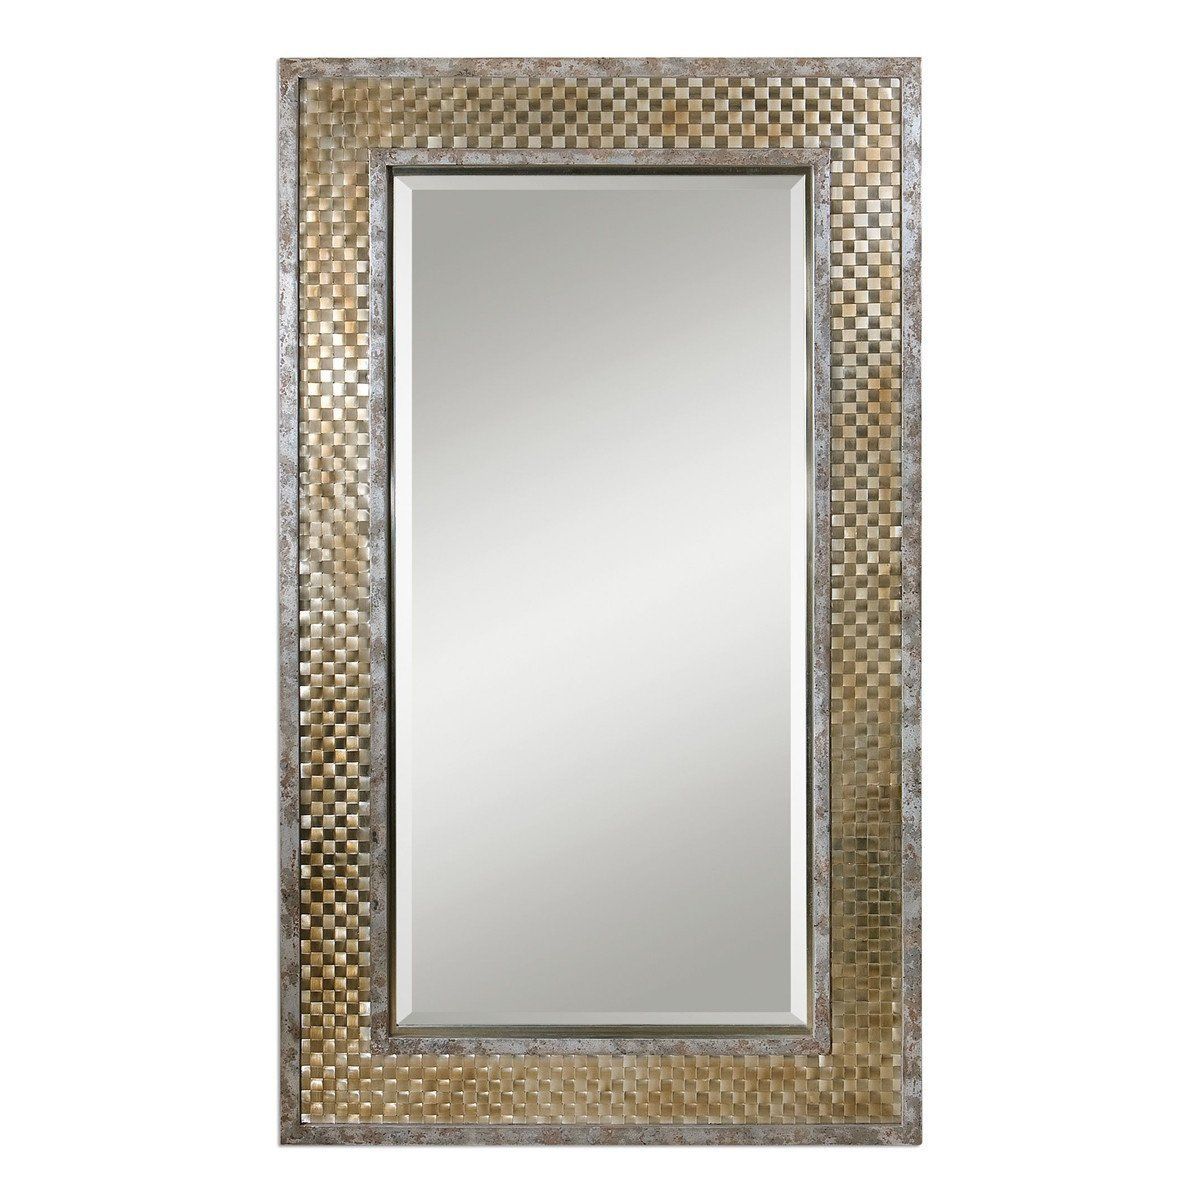 Mondego Woven Nickel Mirror | Brushed Nickel Mirror, Rectangular Mirror With Brushed Nickel Rectangular Wall Mirrors (View 6 of 15)